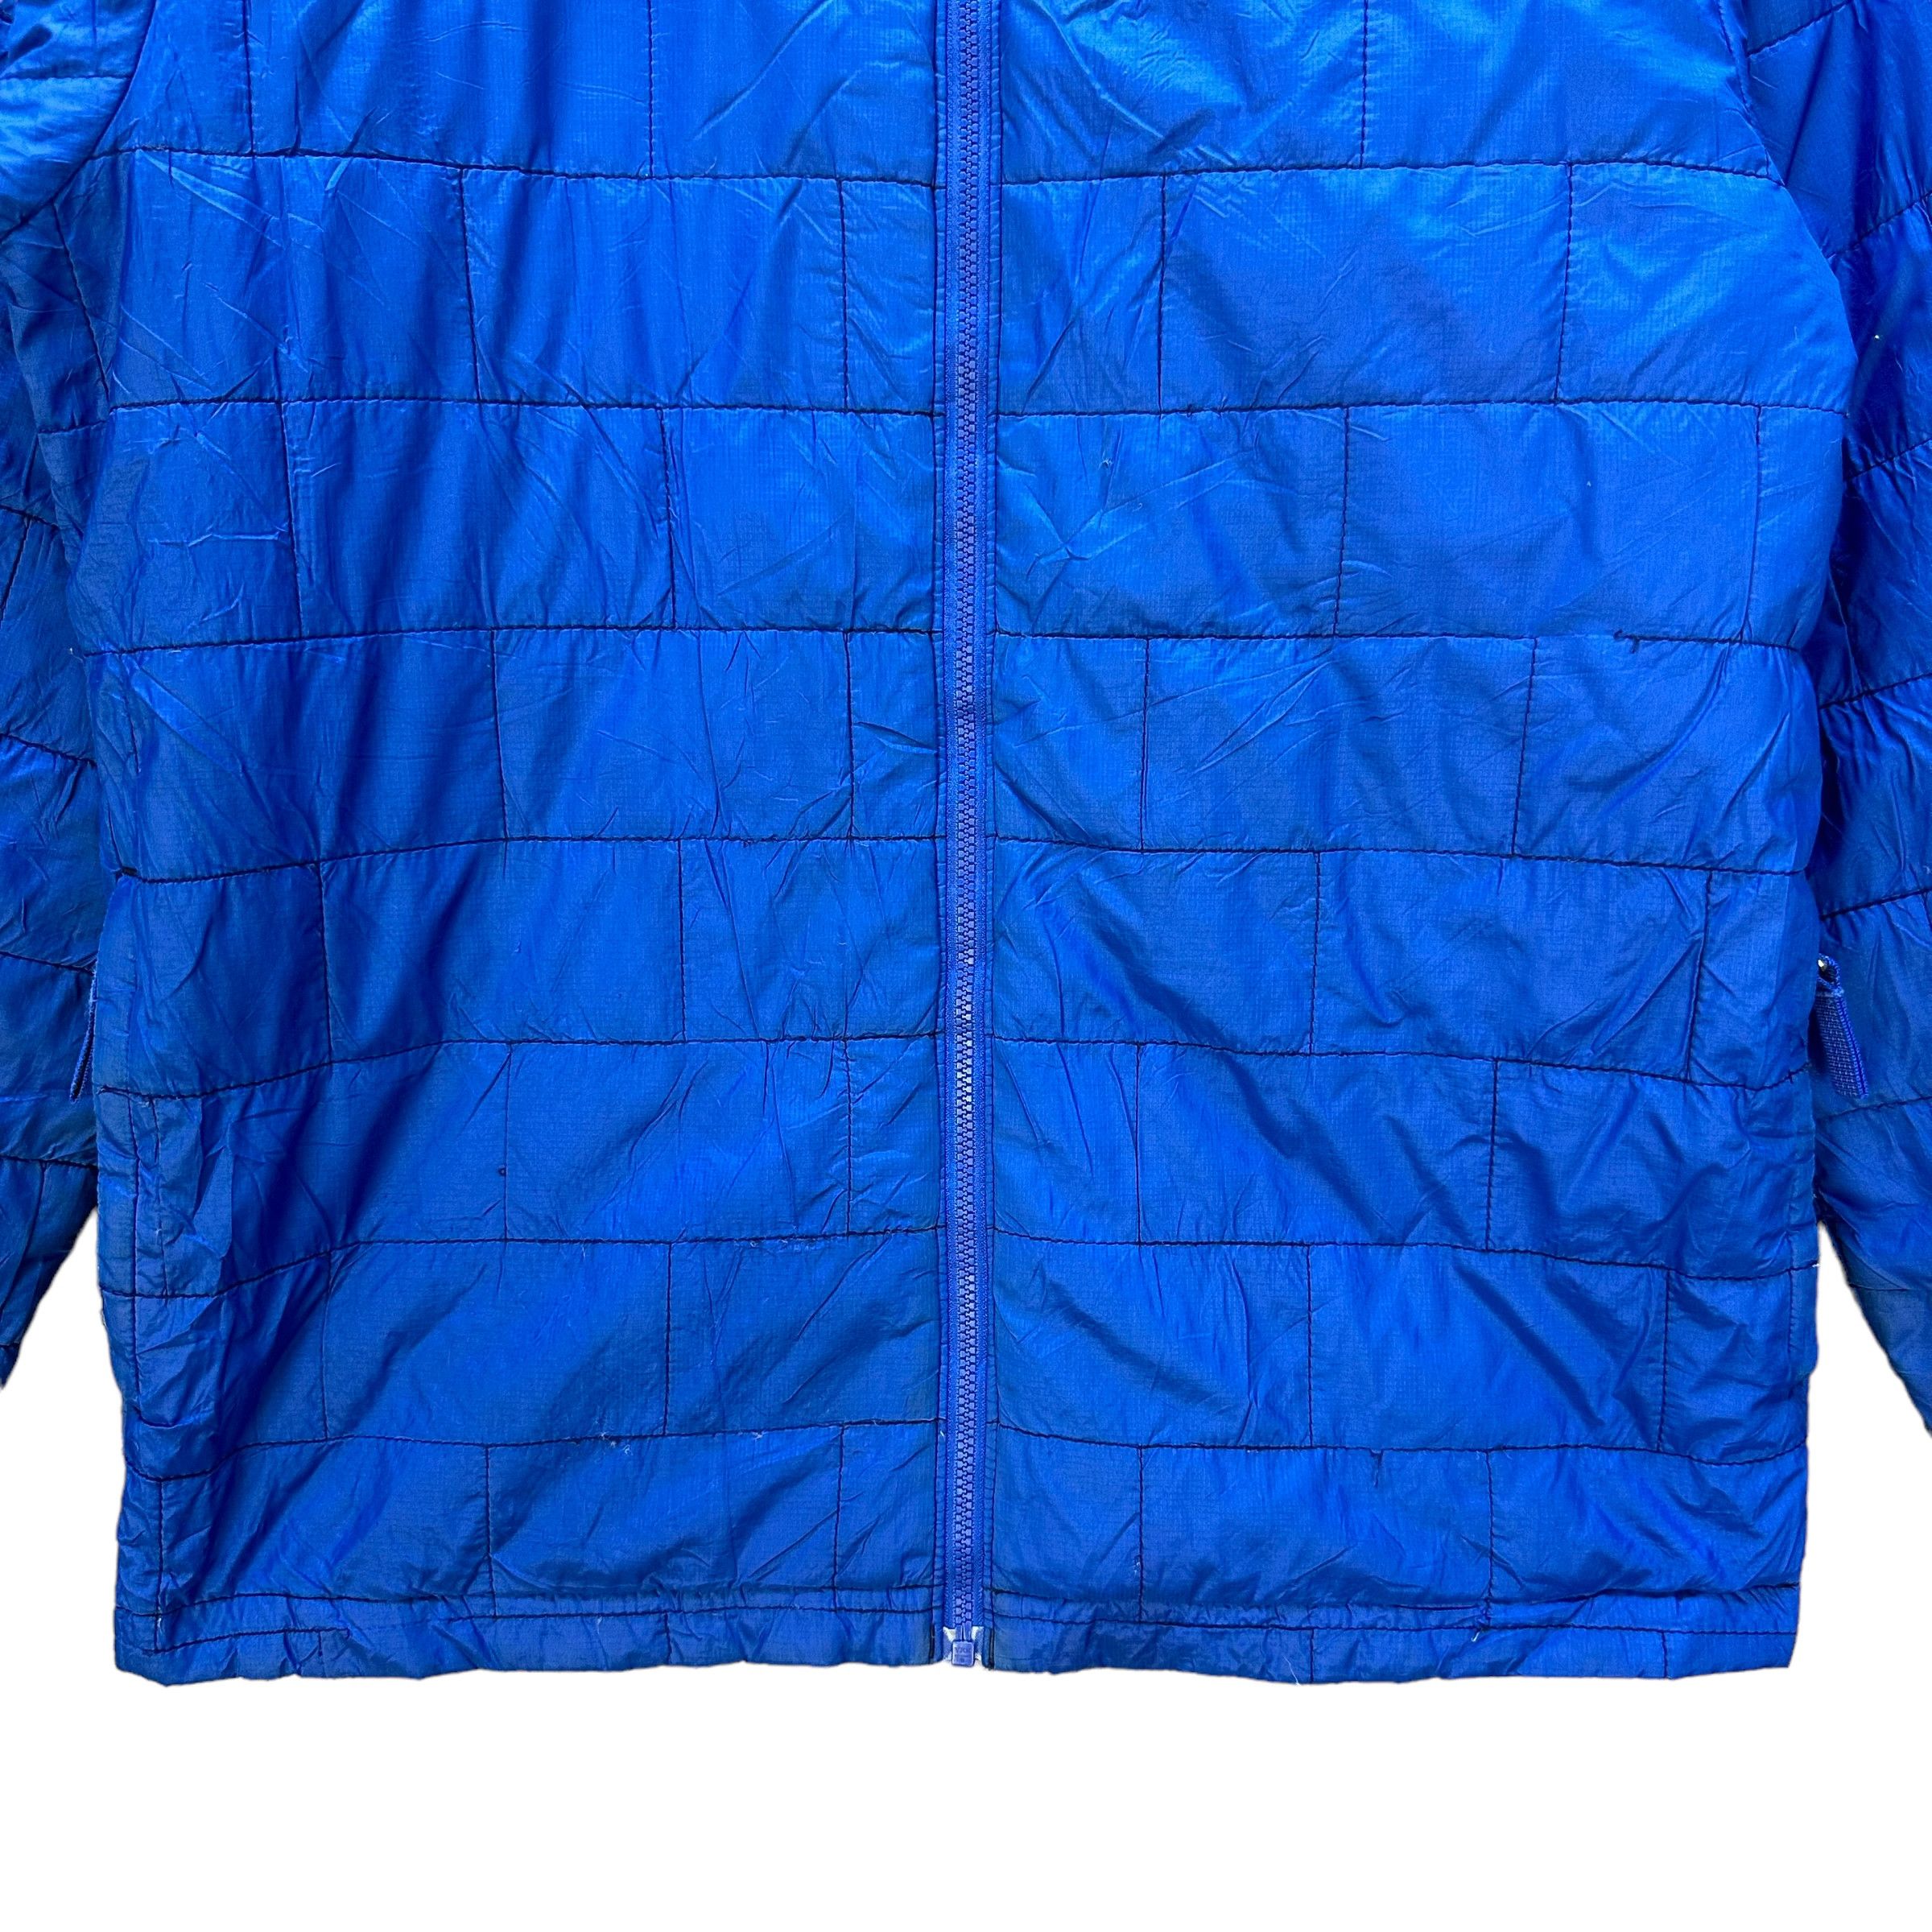 PATAGONIA LIGHT PUFFER JACKET IN BLUE FOR KIDS #9020-48 - 4